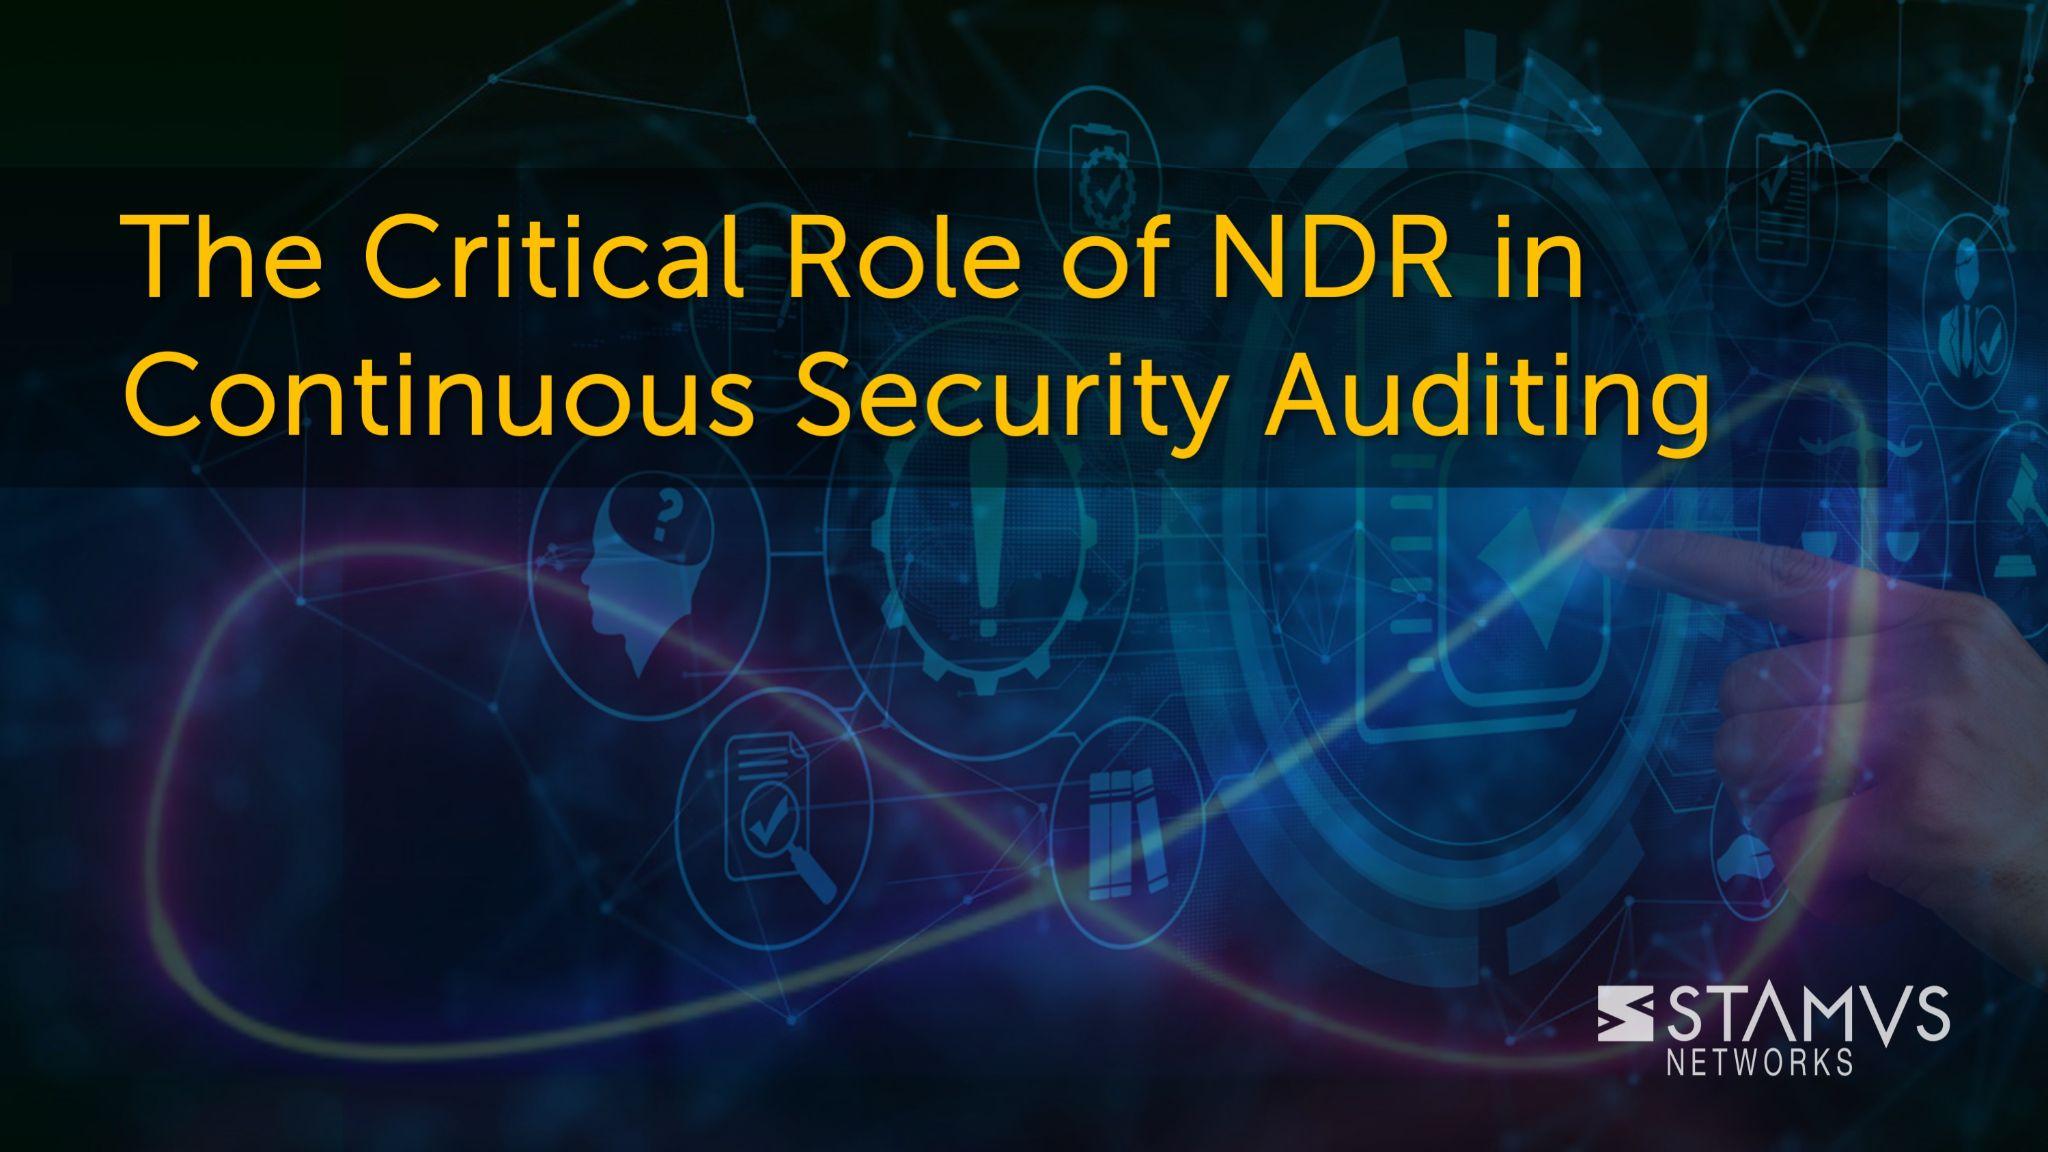 The Critical Role of NDR in Continuous Security Auditing